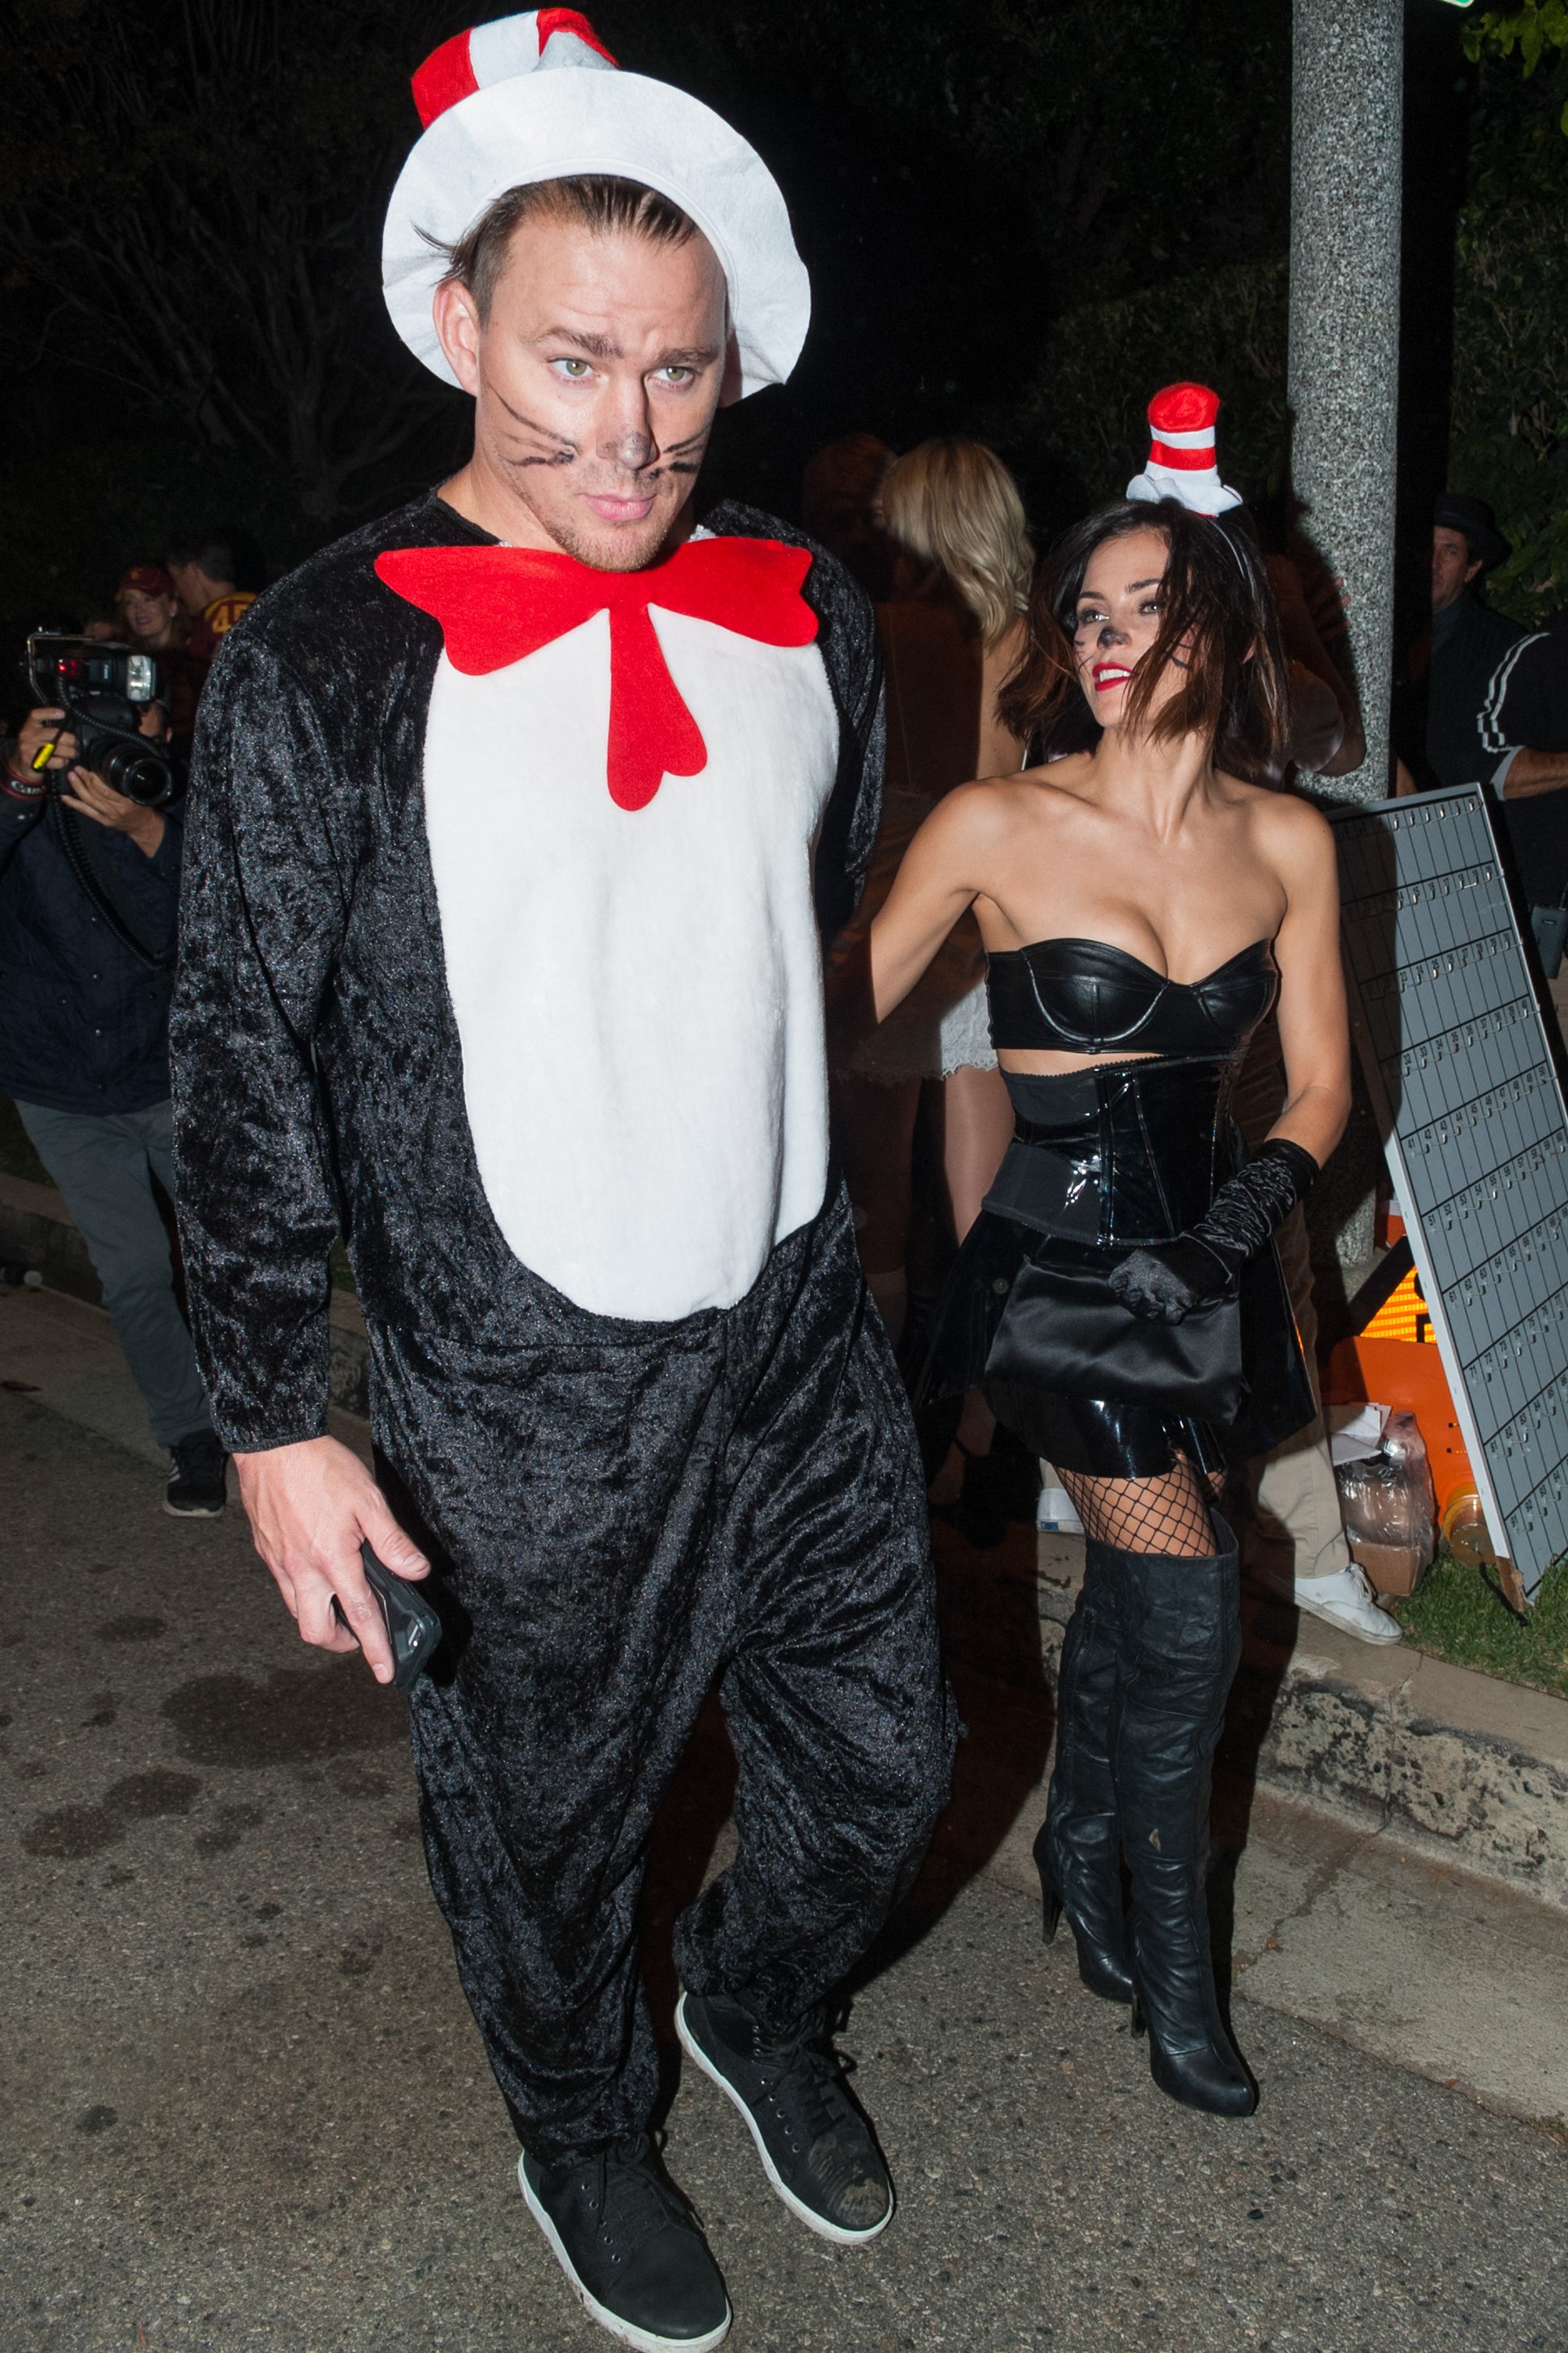 The Best Celebrity Halloween Costumes Ever Photos | GQ